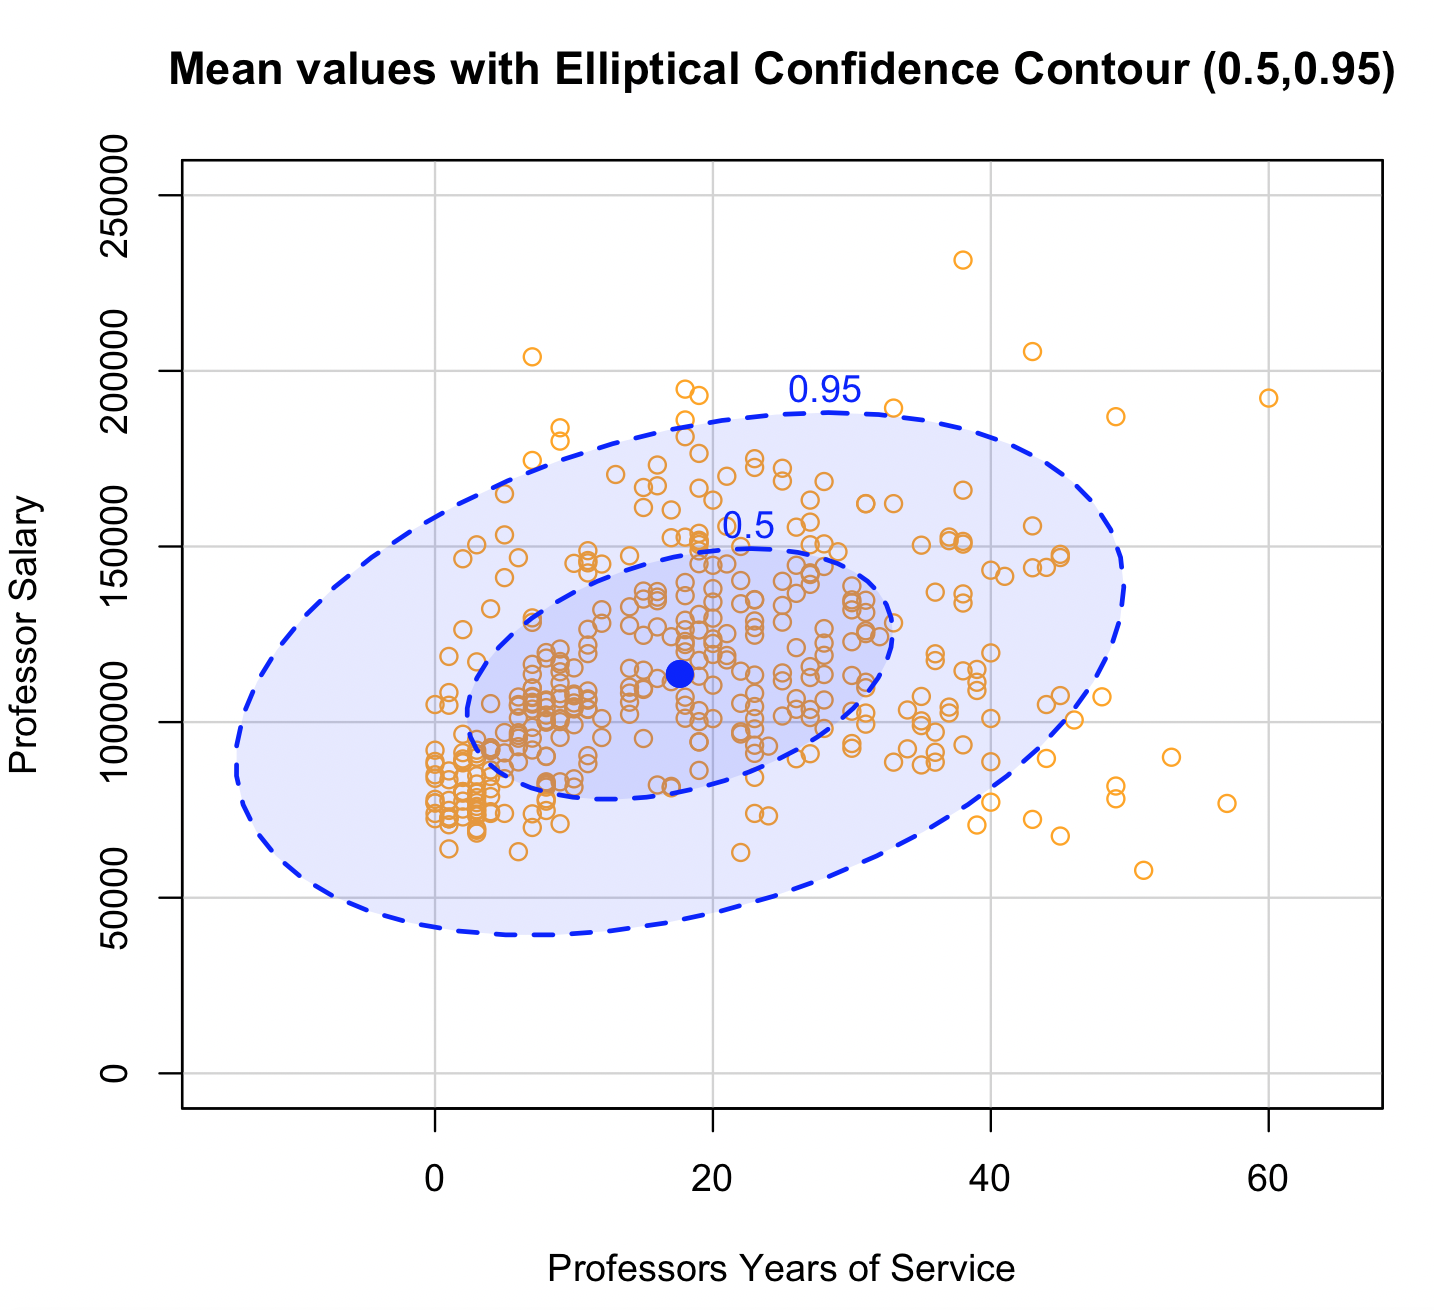 Confidence Contour of salaries versus years of service for professors using the R programming language. Yes the salaries for professors are very low compared to what they have to do to be a professor.